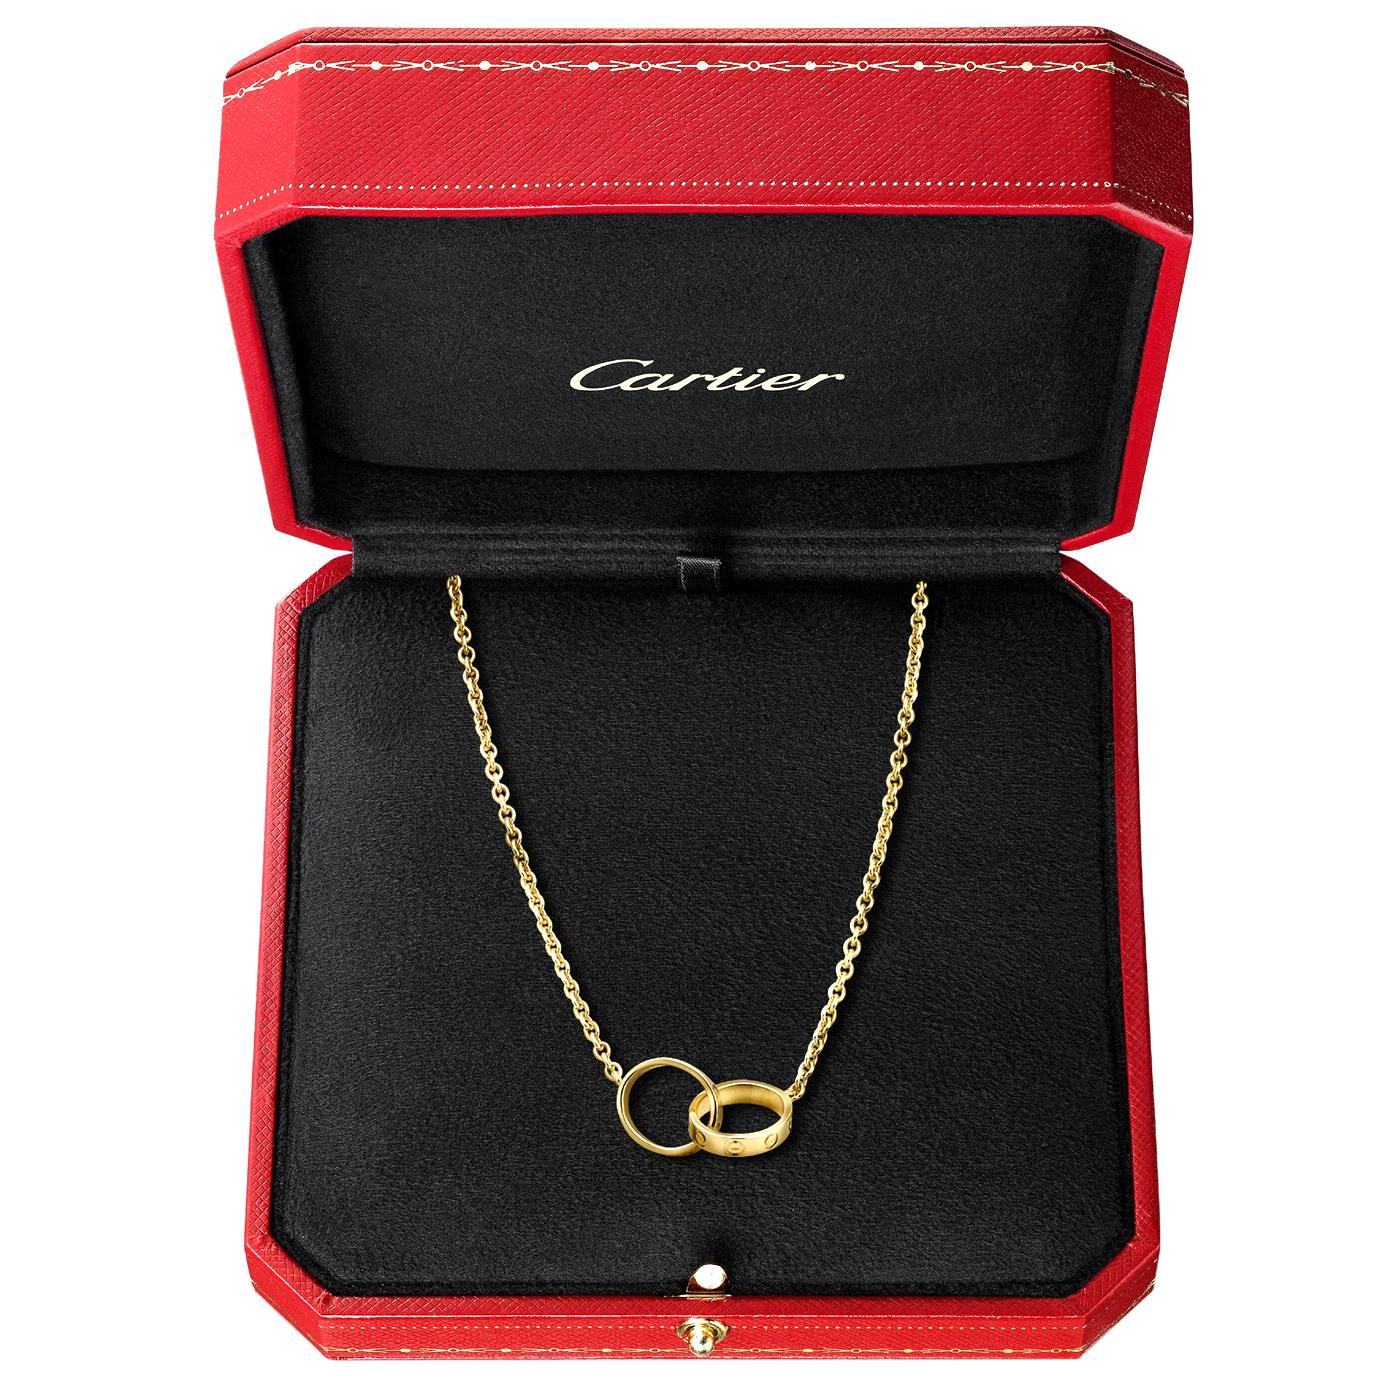 Cartier Love Necklace 18K Yellow Gold 17.3 Inches Long In Excellent Condition For Sale In Aventura, FL